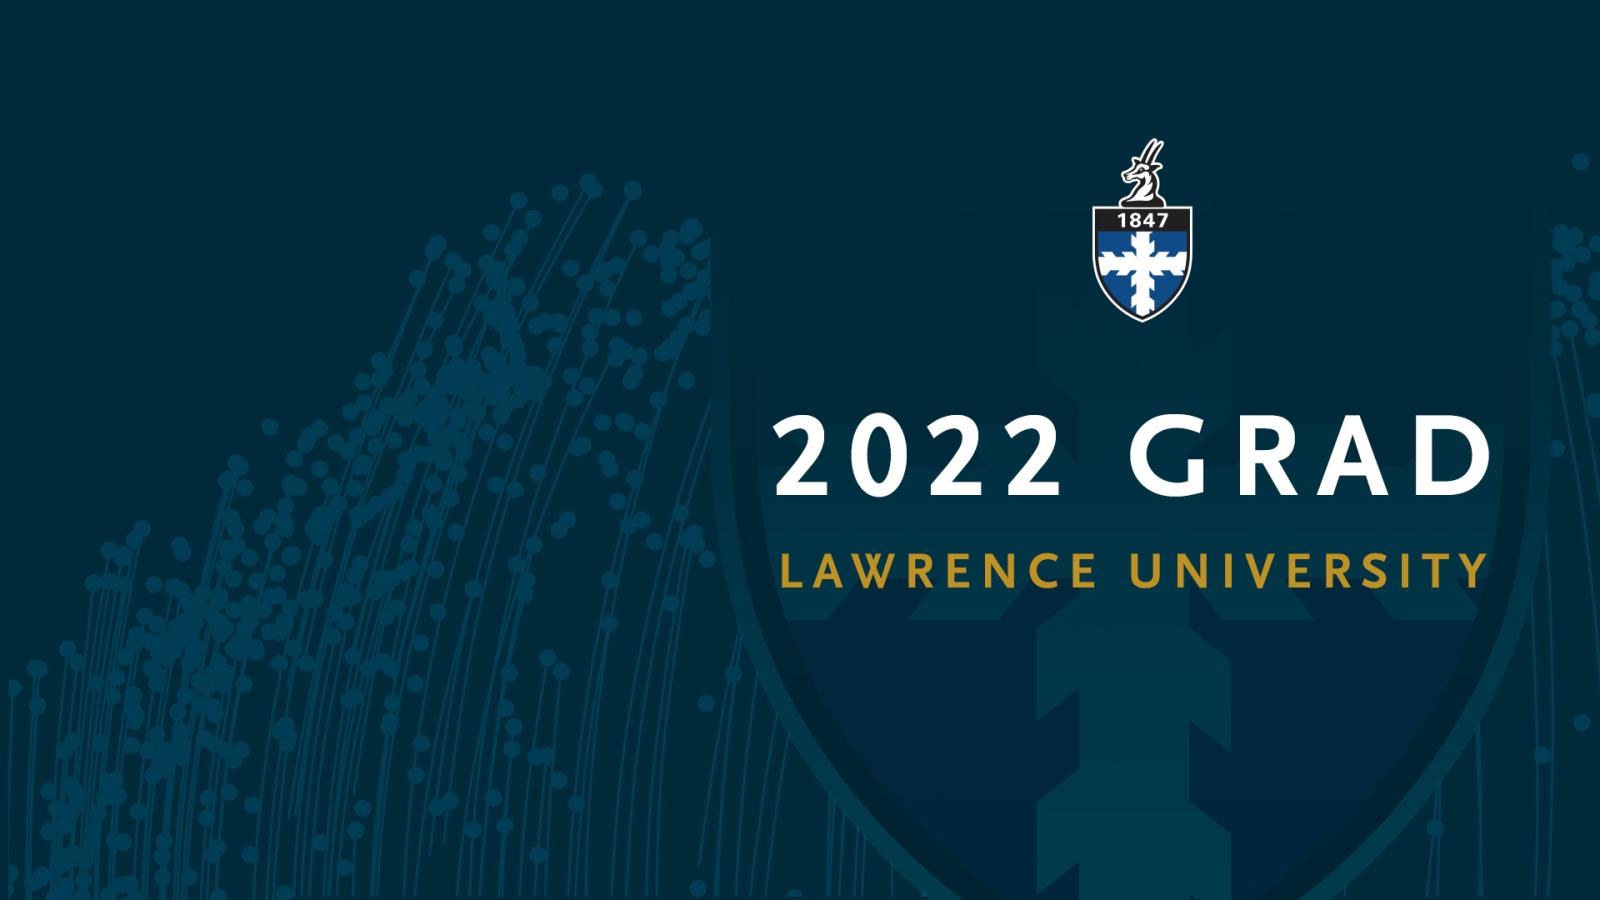 Lawrence University crest with words 2022 Grad Lawrence University.